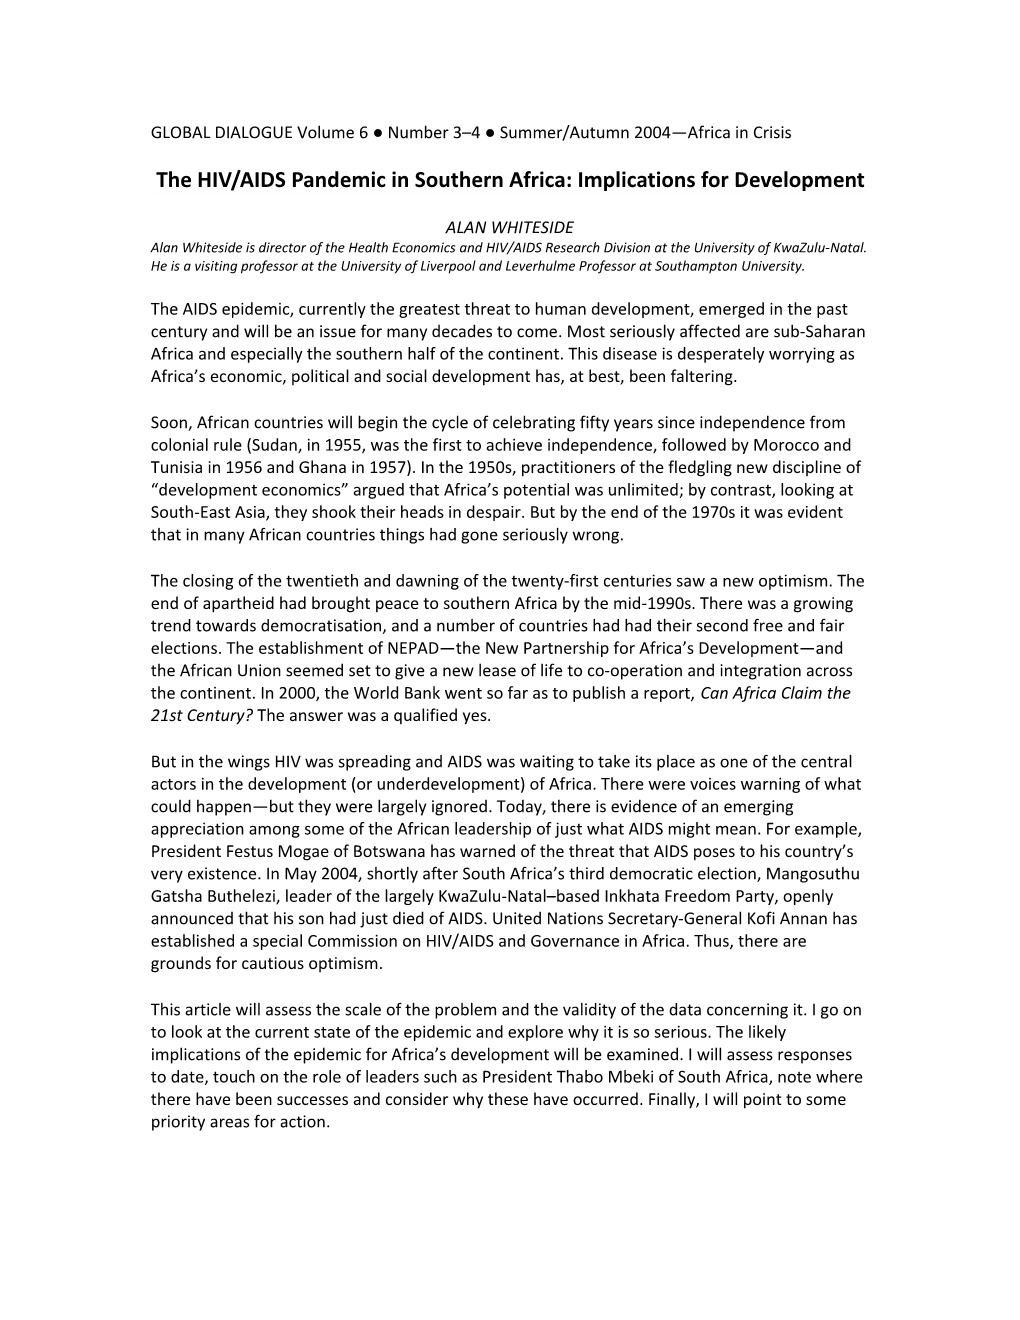 The HIV/AIDS Pandemic in Southern Africa: Implications for Development